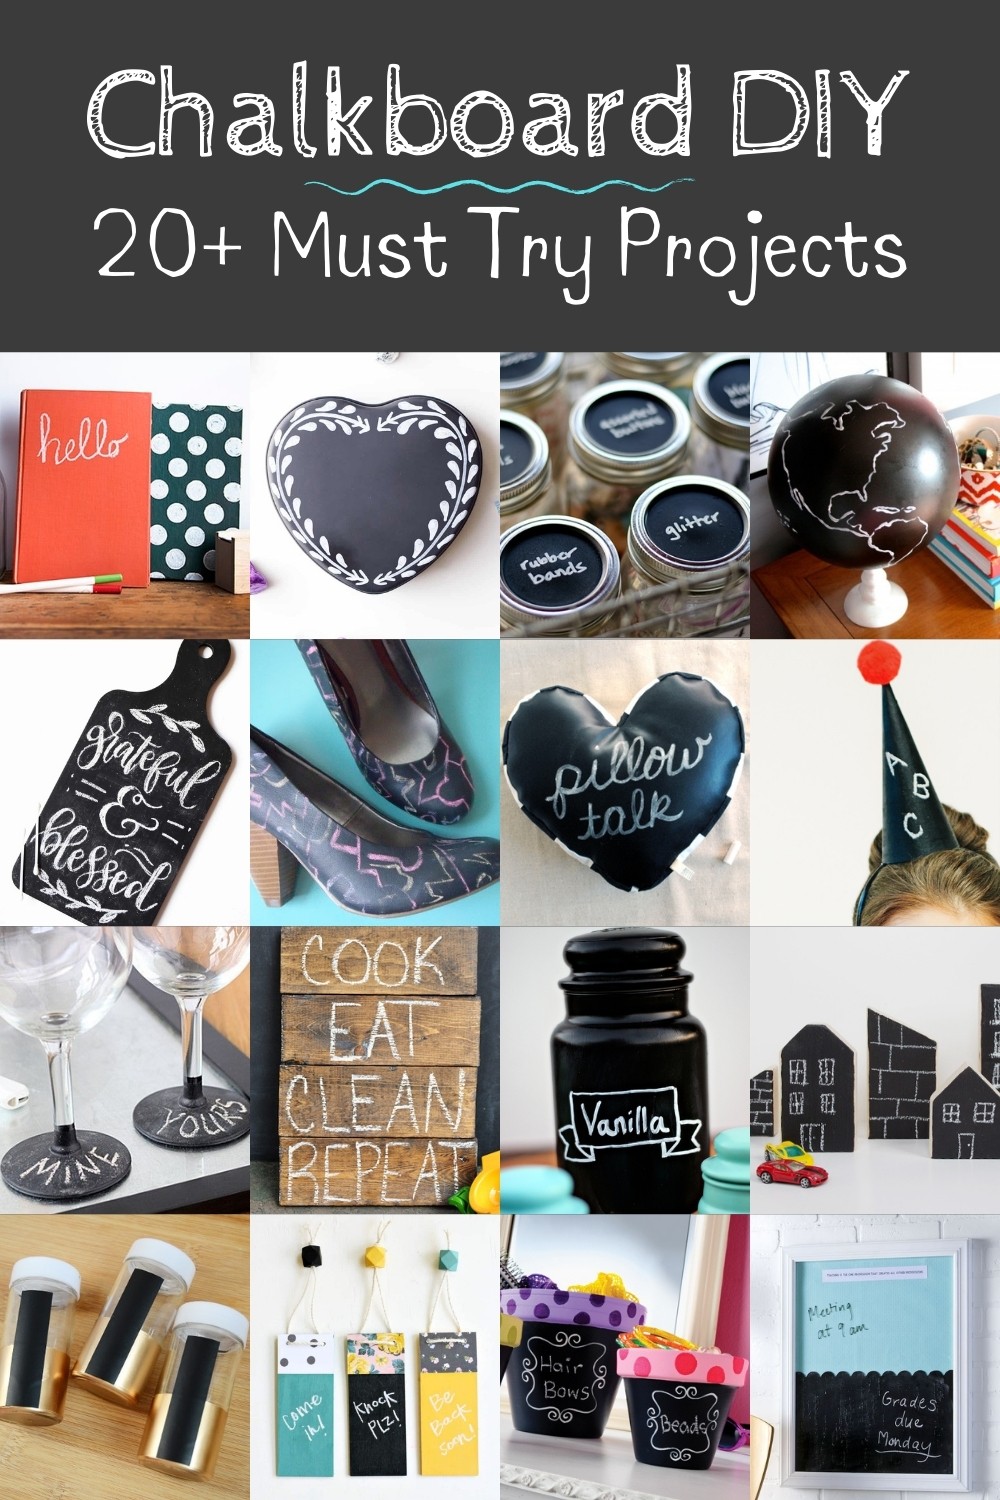 Over 20 Chalkboard DIY Projects